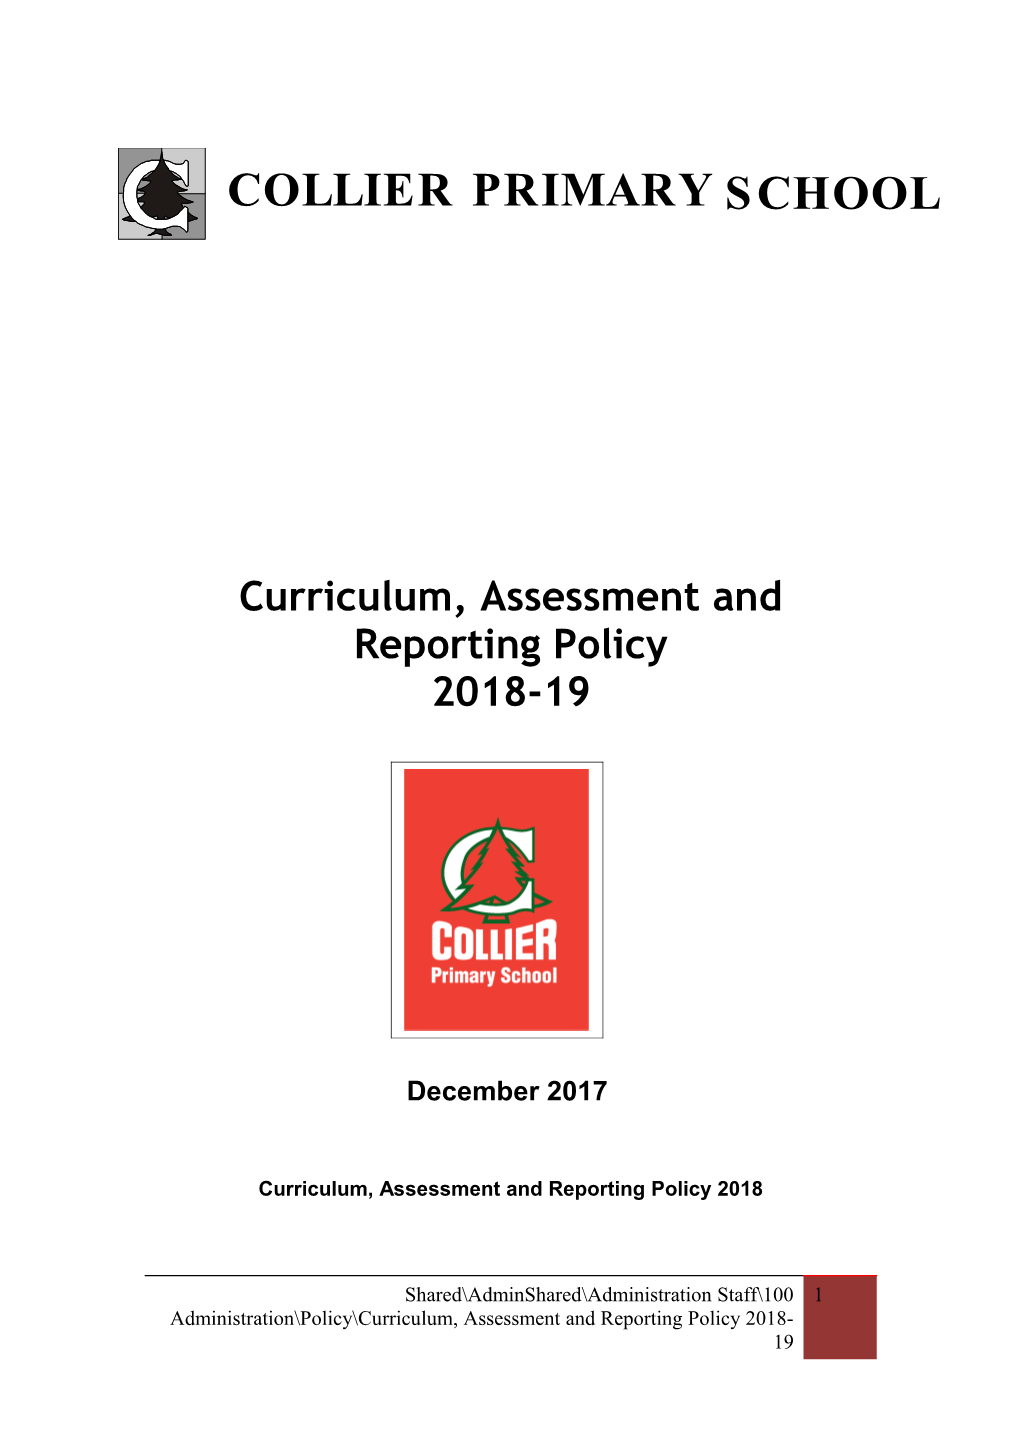 Curriculum, Assessment and Reporting Policy